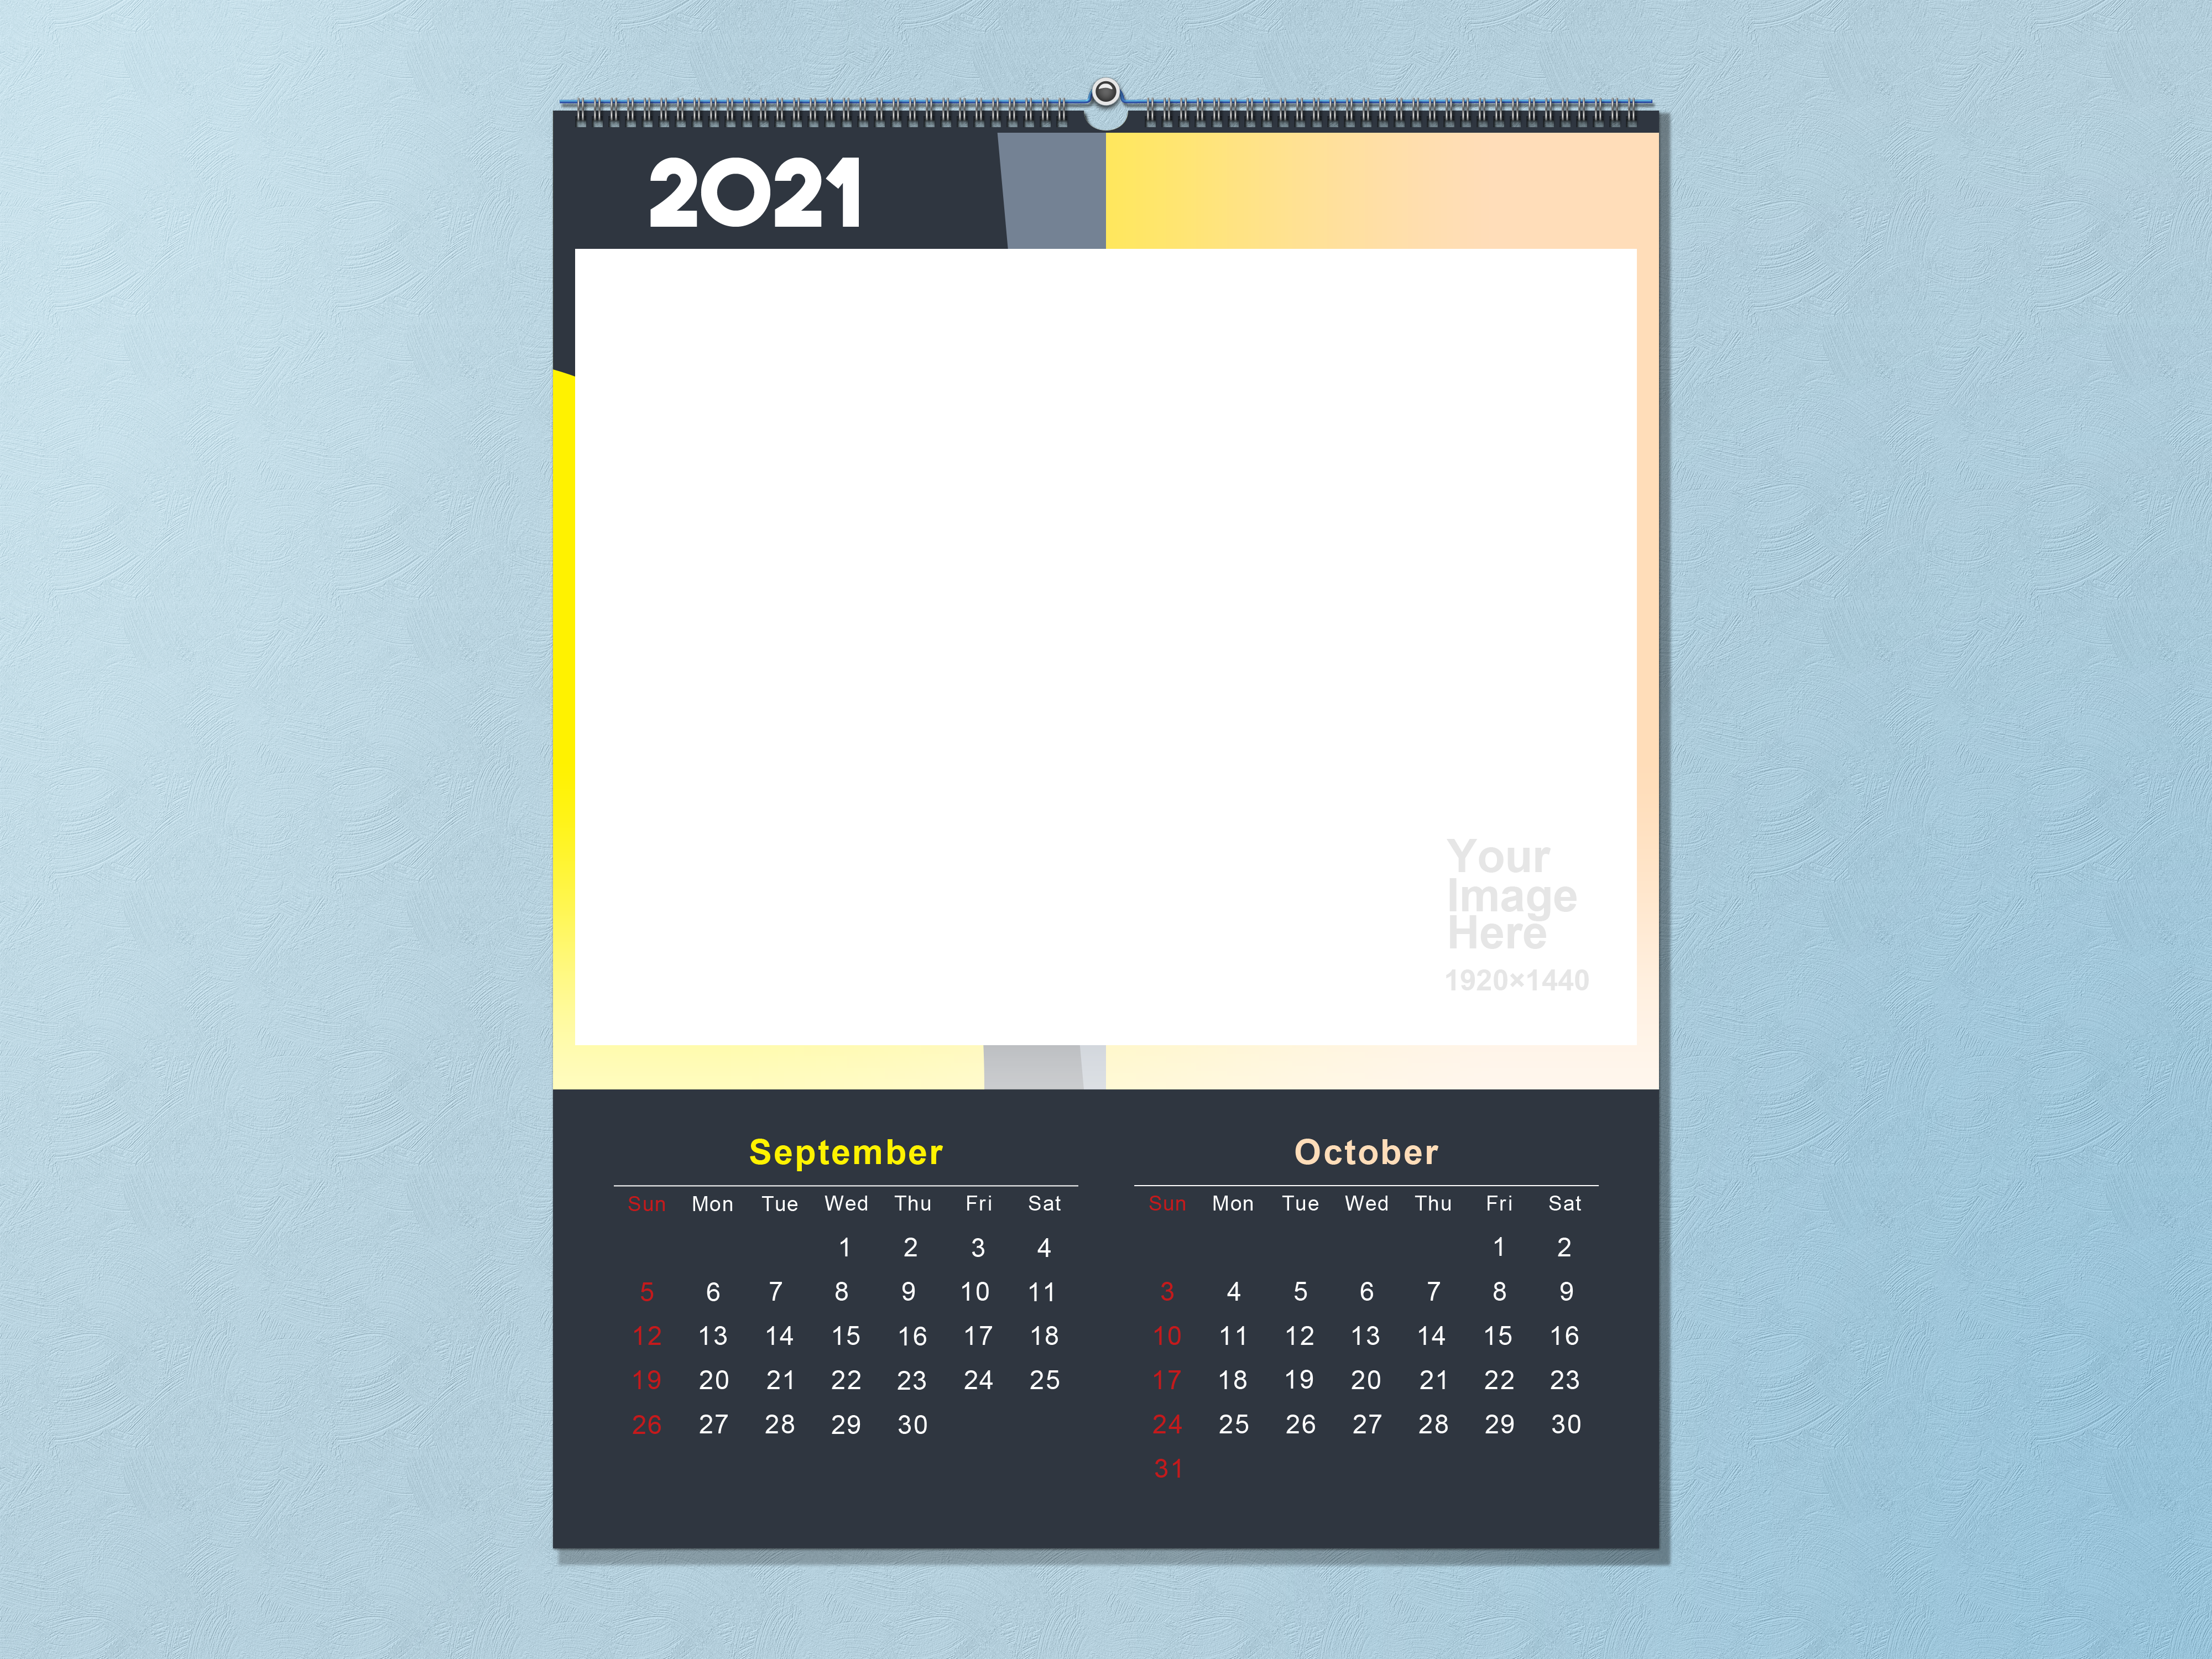 General 4000x3000 template September October calendar 2021 (year) numbers cyan background simple background